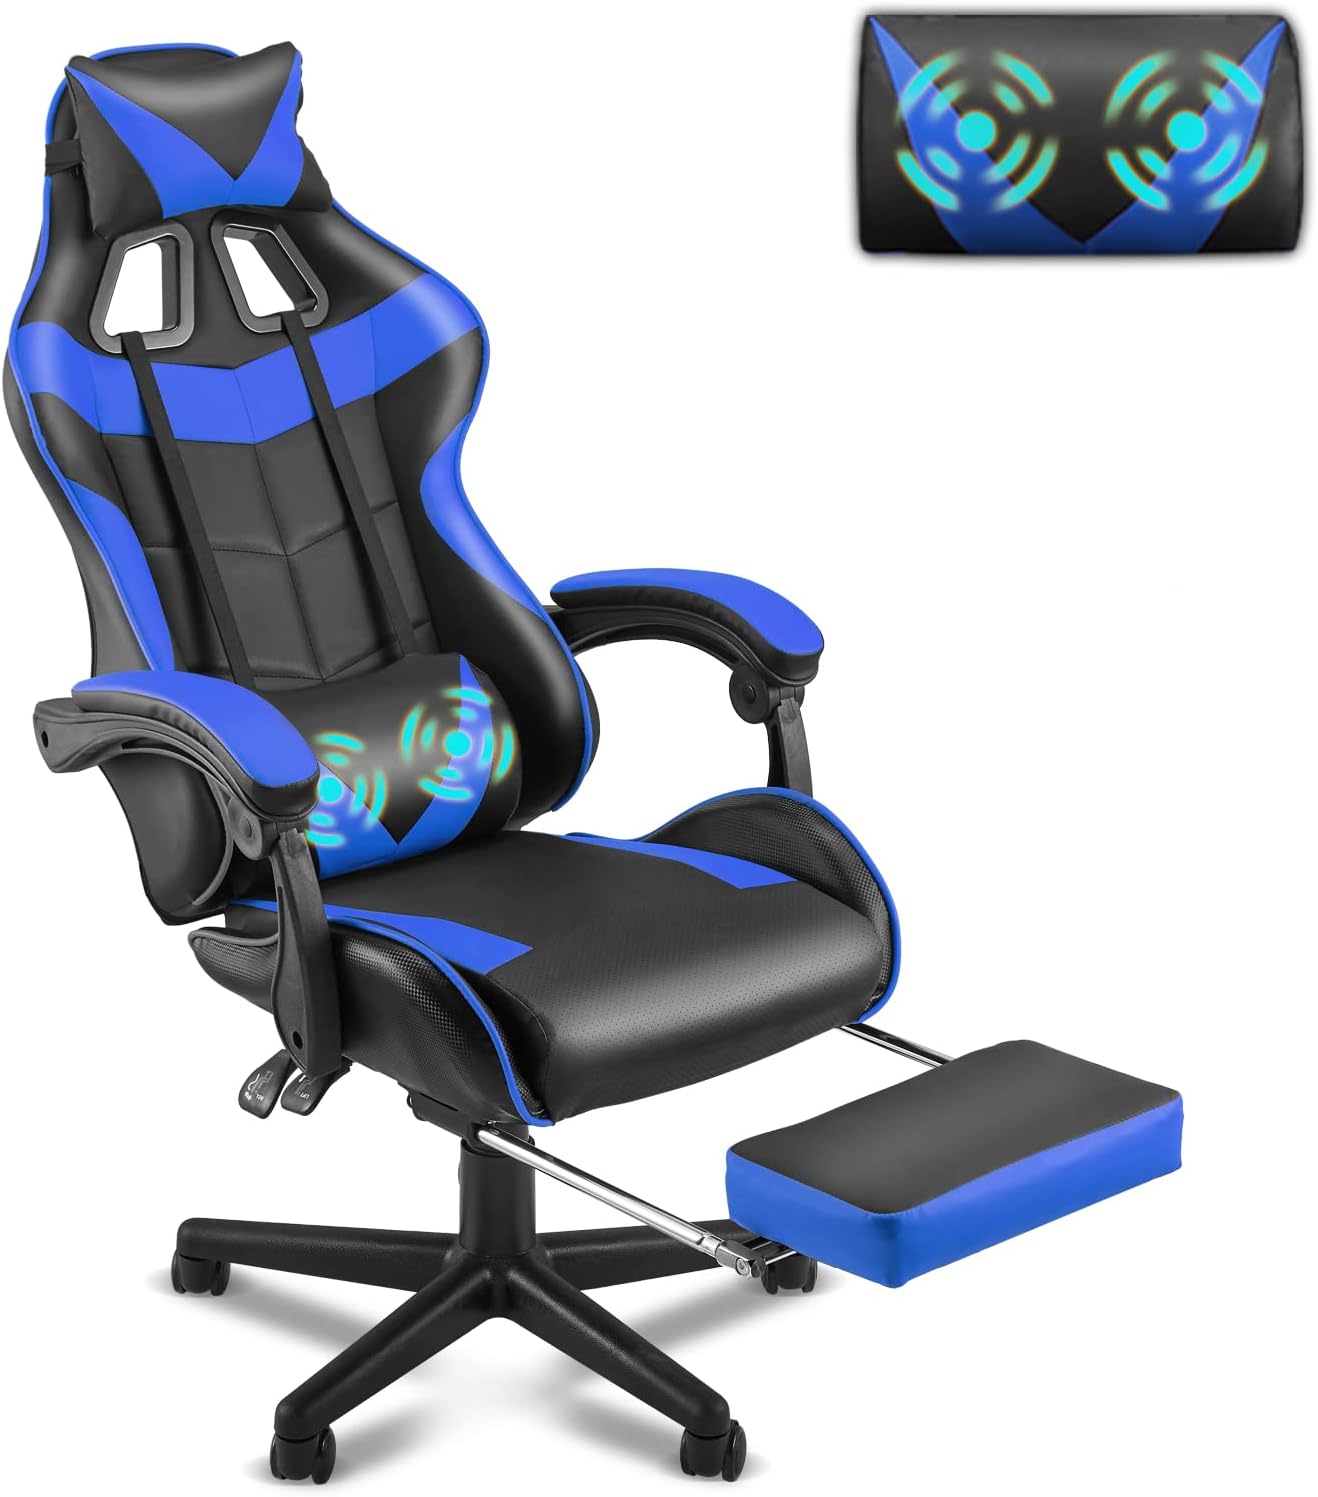 Soontrans Gaming Chair with Footrest,Gaming Computer Chair, Office Gaming Chair Ergonomic Gamer Chair with Height Adjustment,Headrest and Lumbar Support Gamer Chair(Storm Blue)